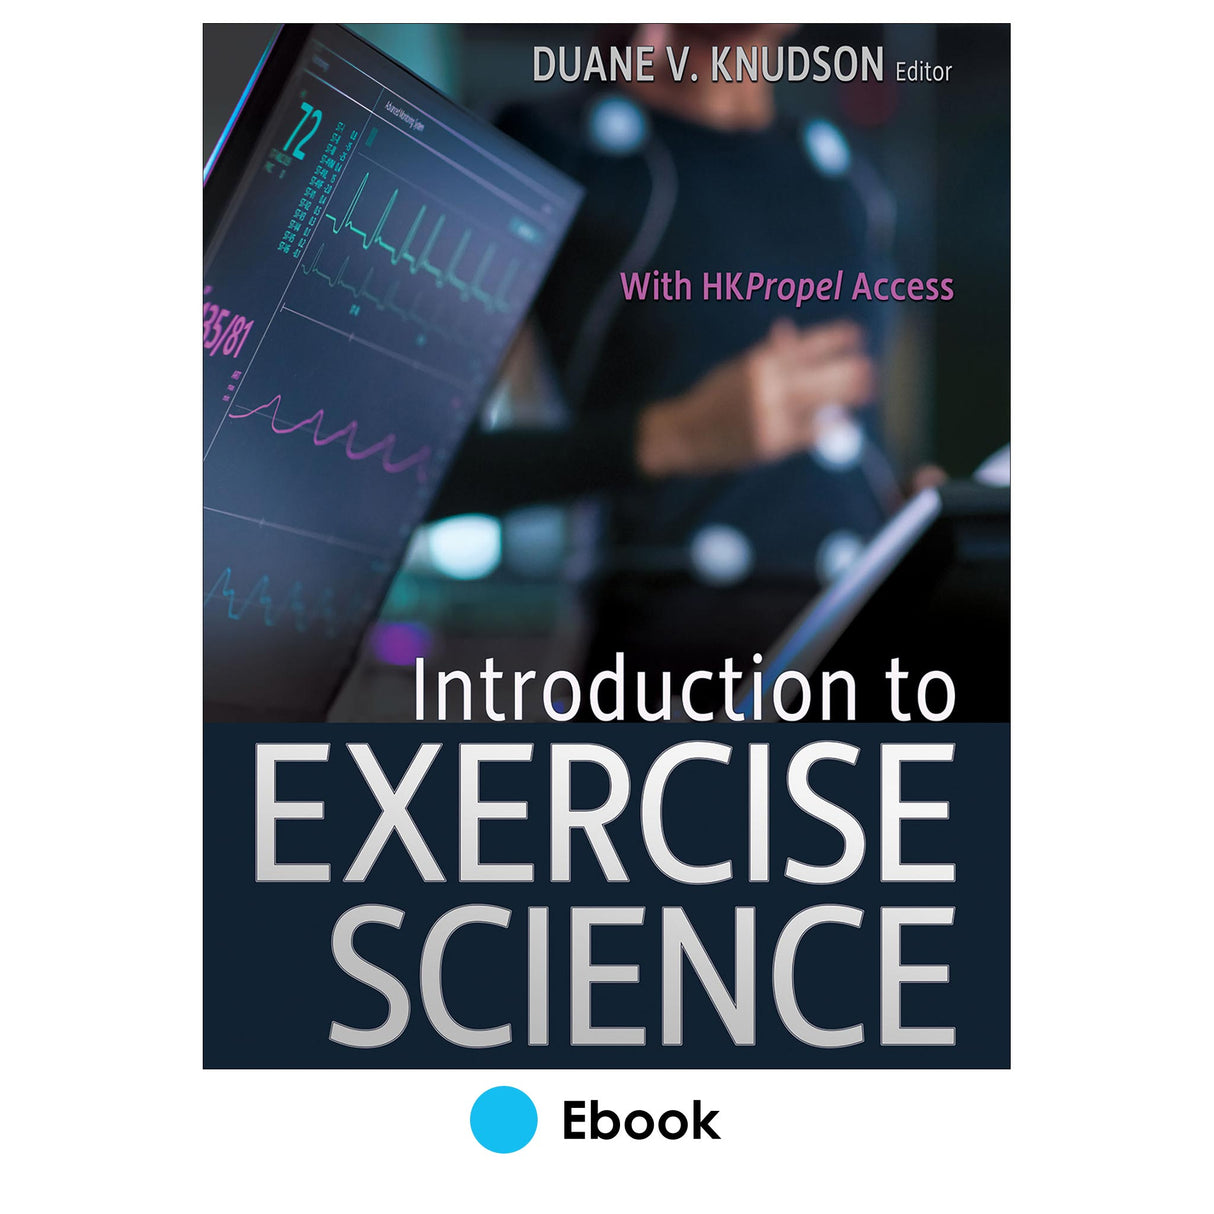 Introduction to Exercise Science Ebook With HKPropel Access